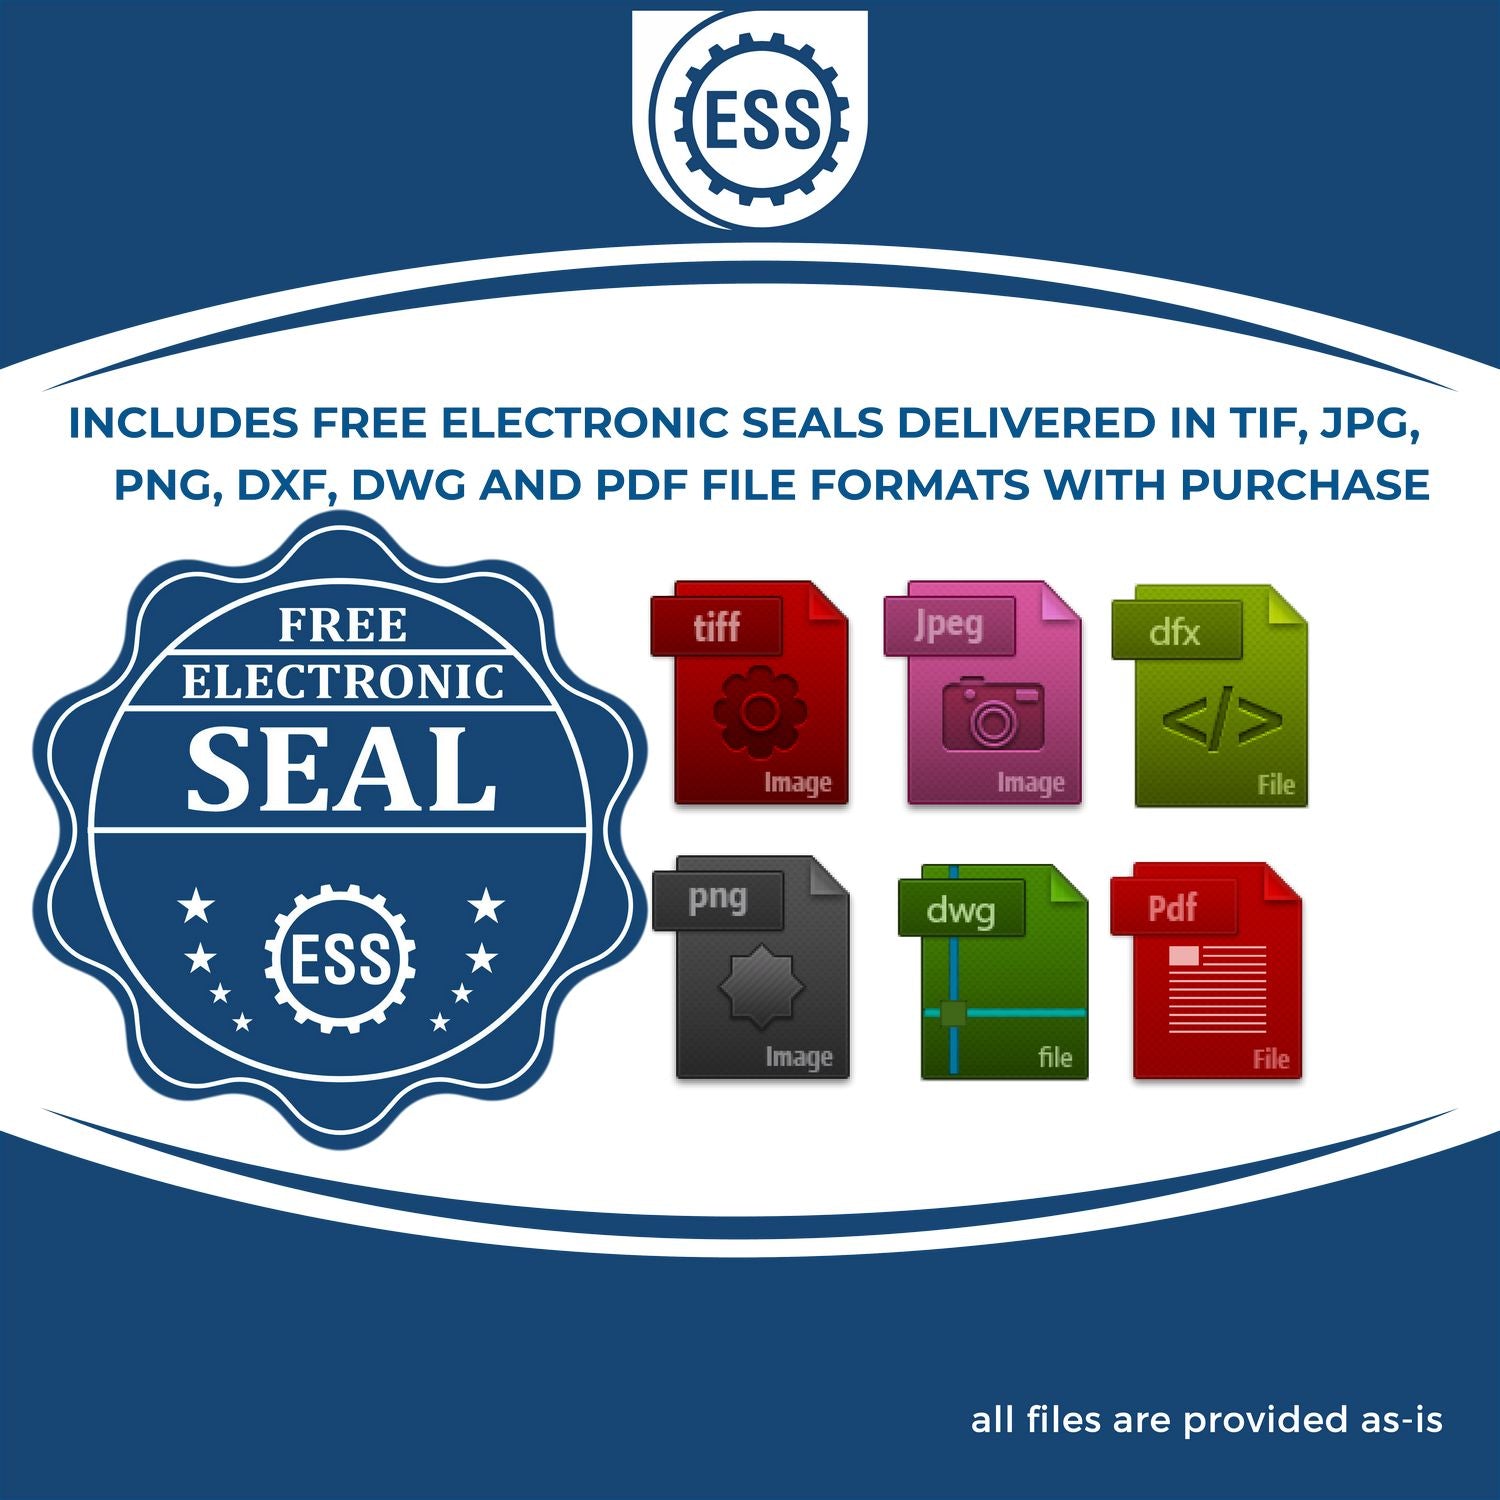 An infographic for the free electronic seal for the Gift Colorado Engineer Seal illustrating the different file type icons such as DXF, DWG, TIF, JPG and PNG.